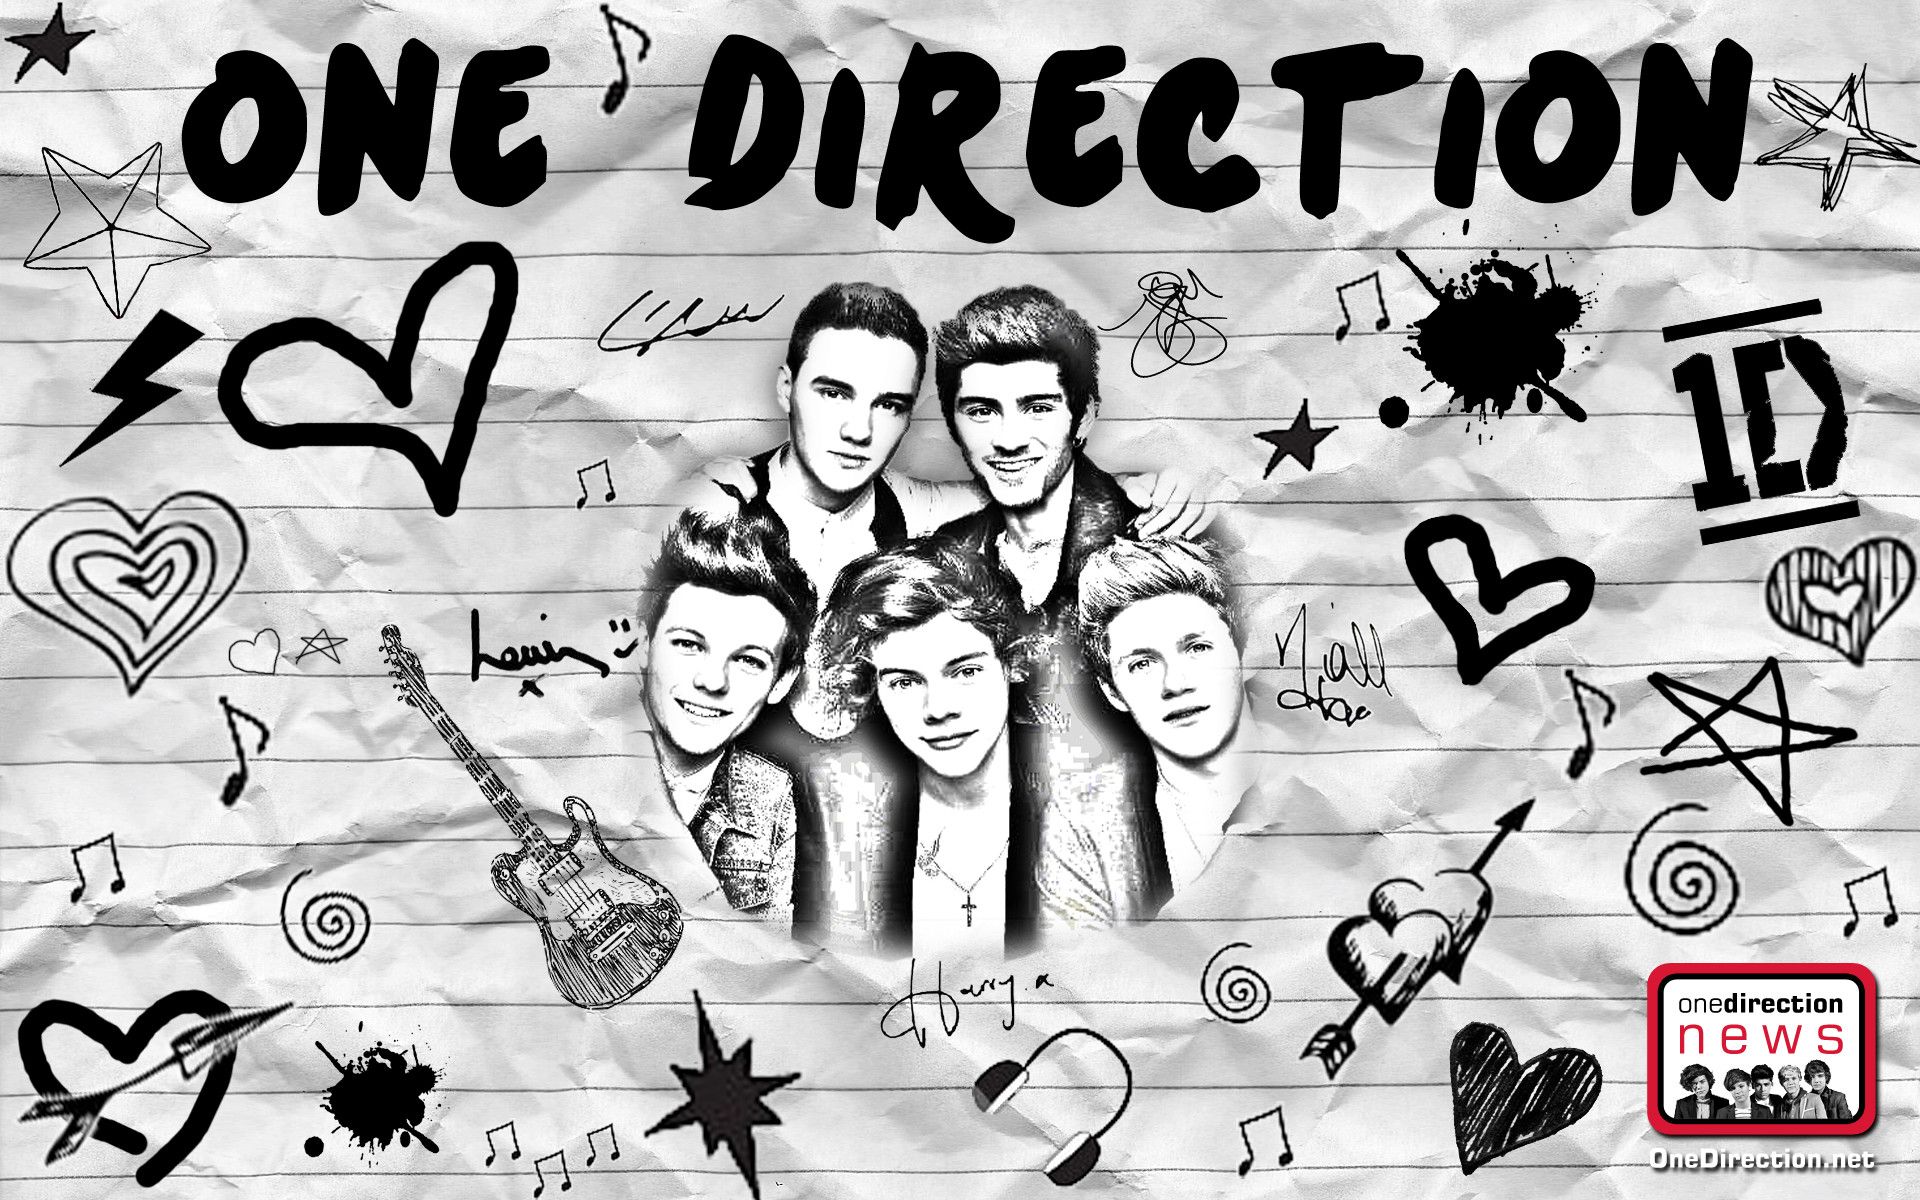 One Direction Wallpaper - One Direction News. - One Direction